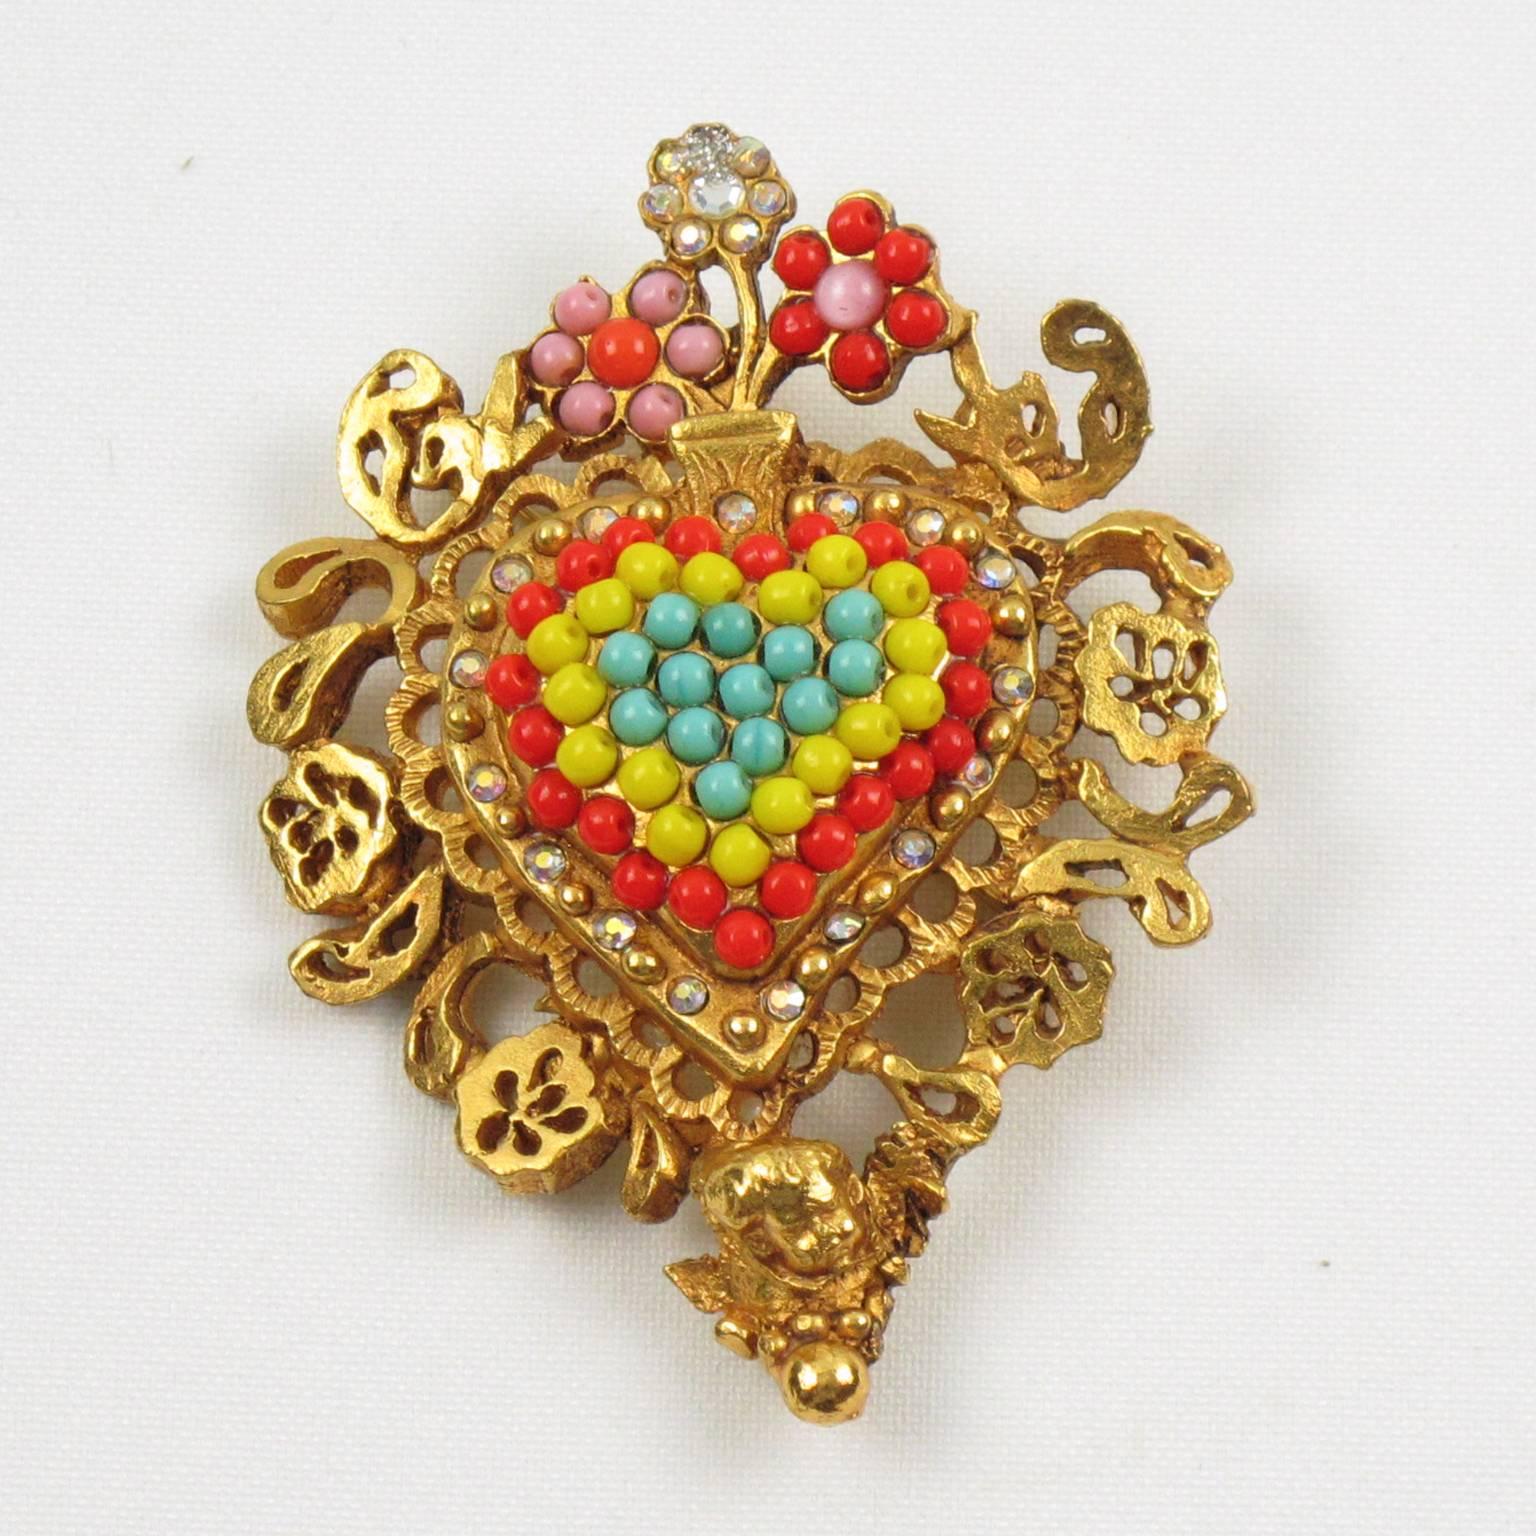 Impressive CHRISTIAN LACROIX Paris signed couture Pin Brooch. Fabulous gilt metal all carved and see thru shape, metal all textured featuring a large baroque inspired heart ornate with cherub face and topped colorful glass beads and aurora borealis